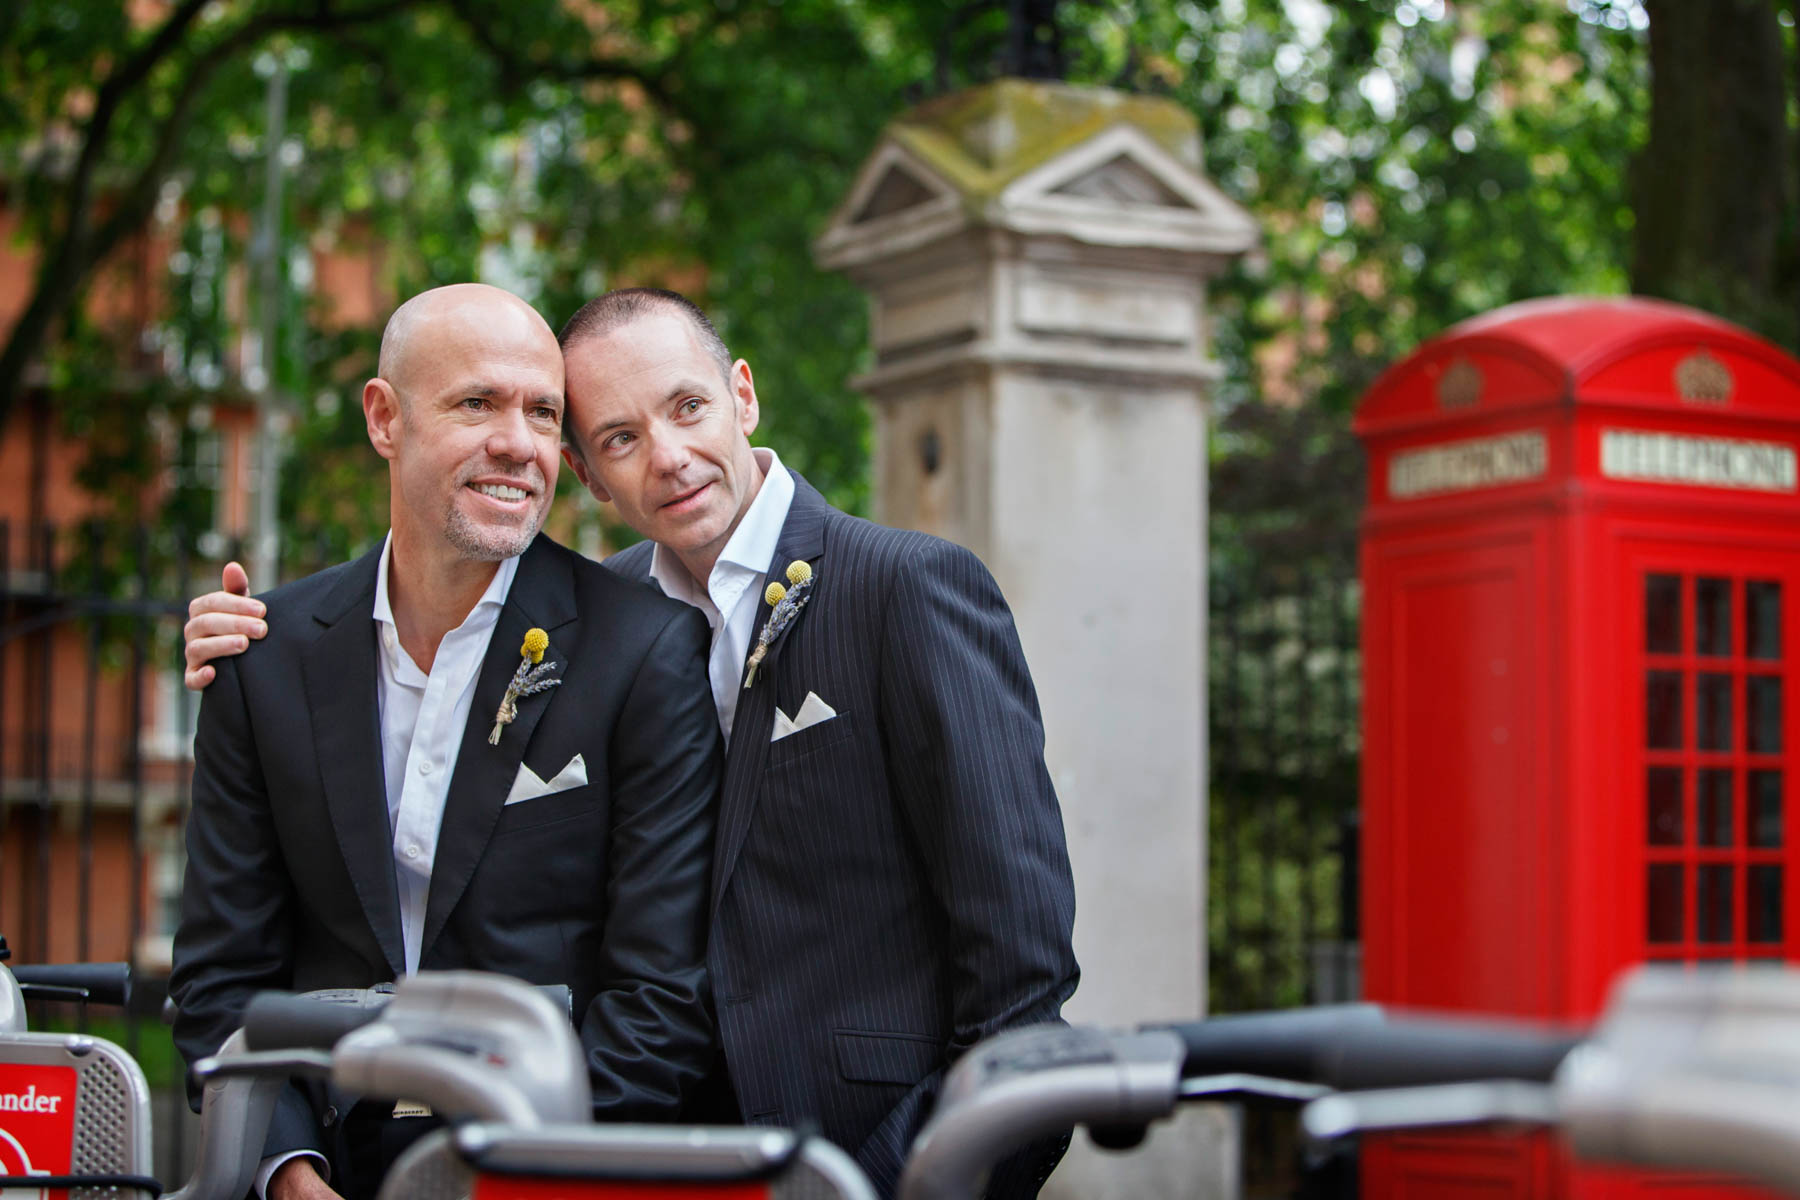 Two grooms snuggle up to each other after their same-sex civil partnership ceremony at Mayfair Library. A classic red London phone booth can be seen in the background.